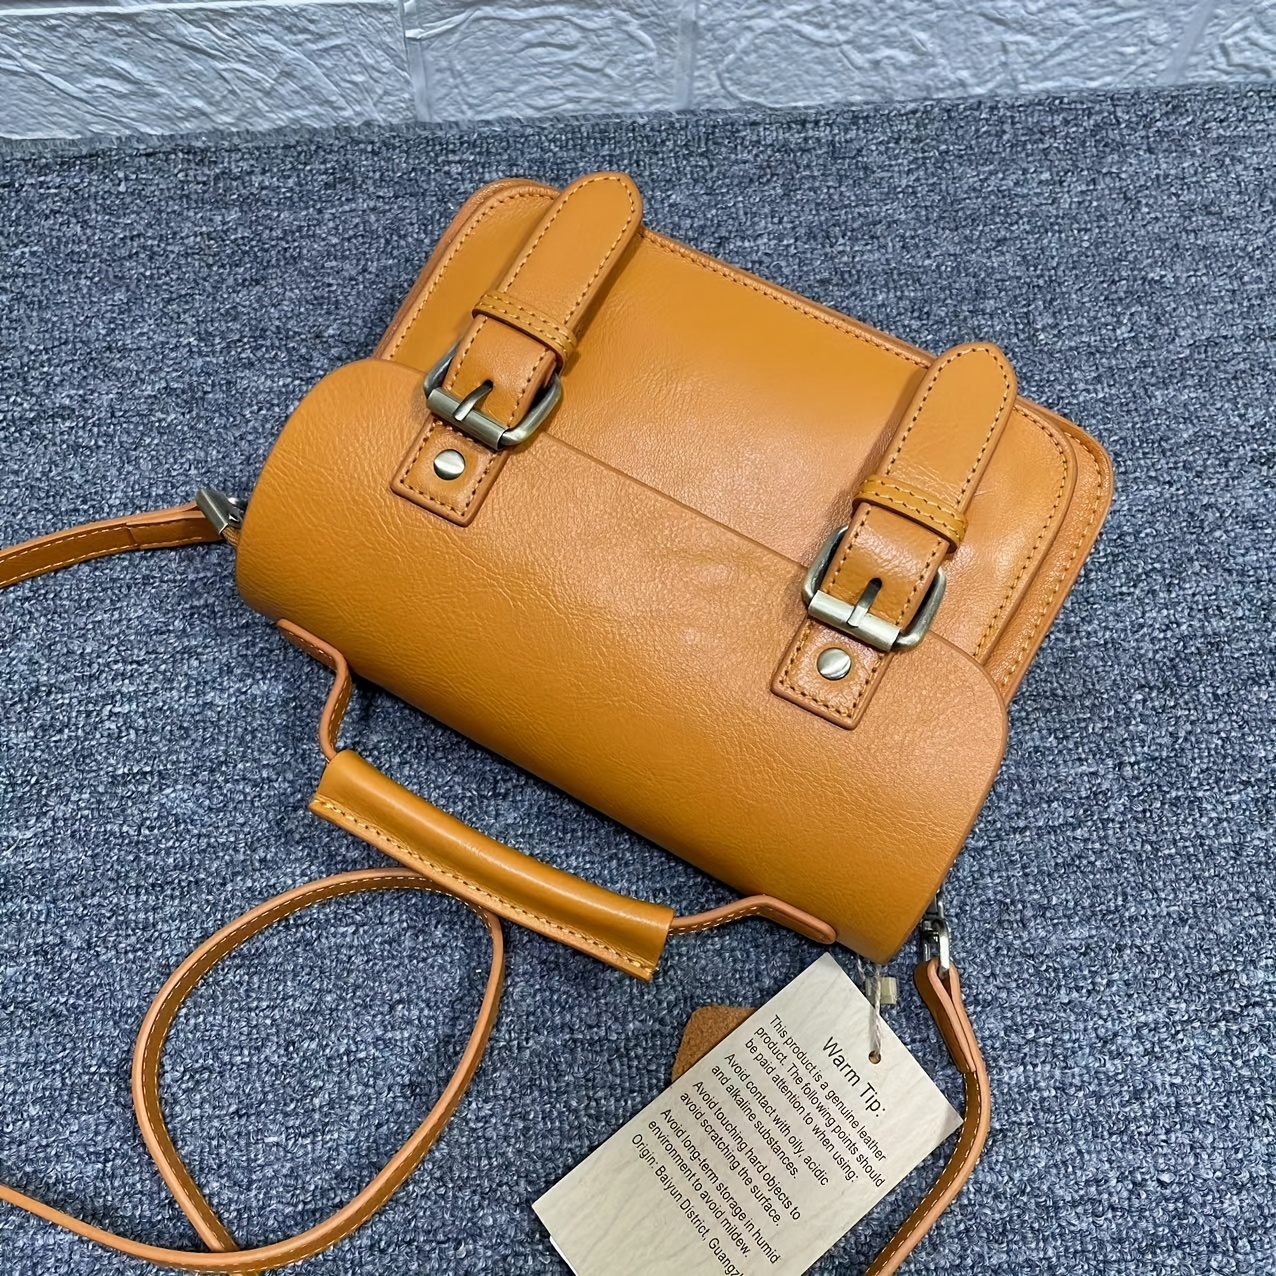 District leather bag